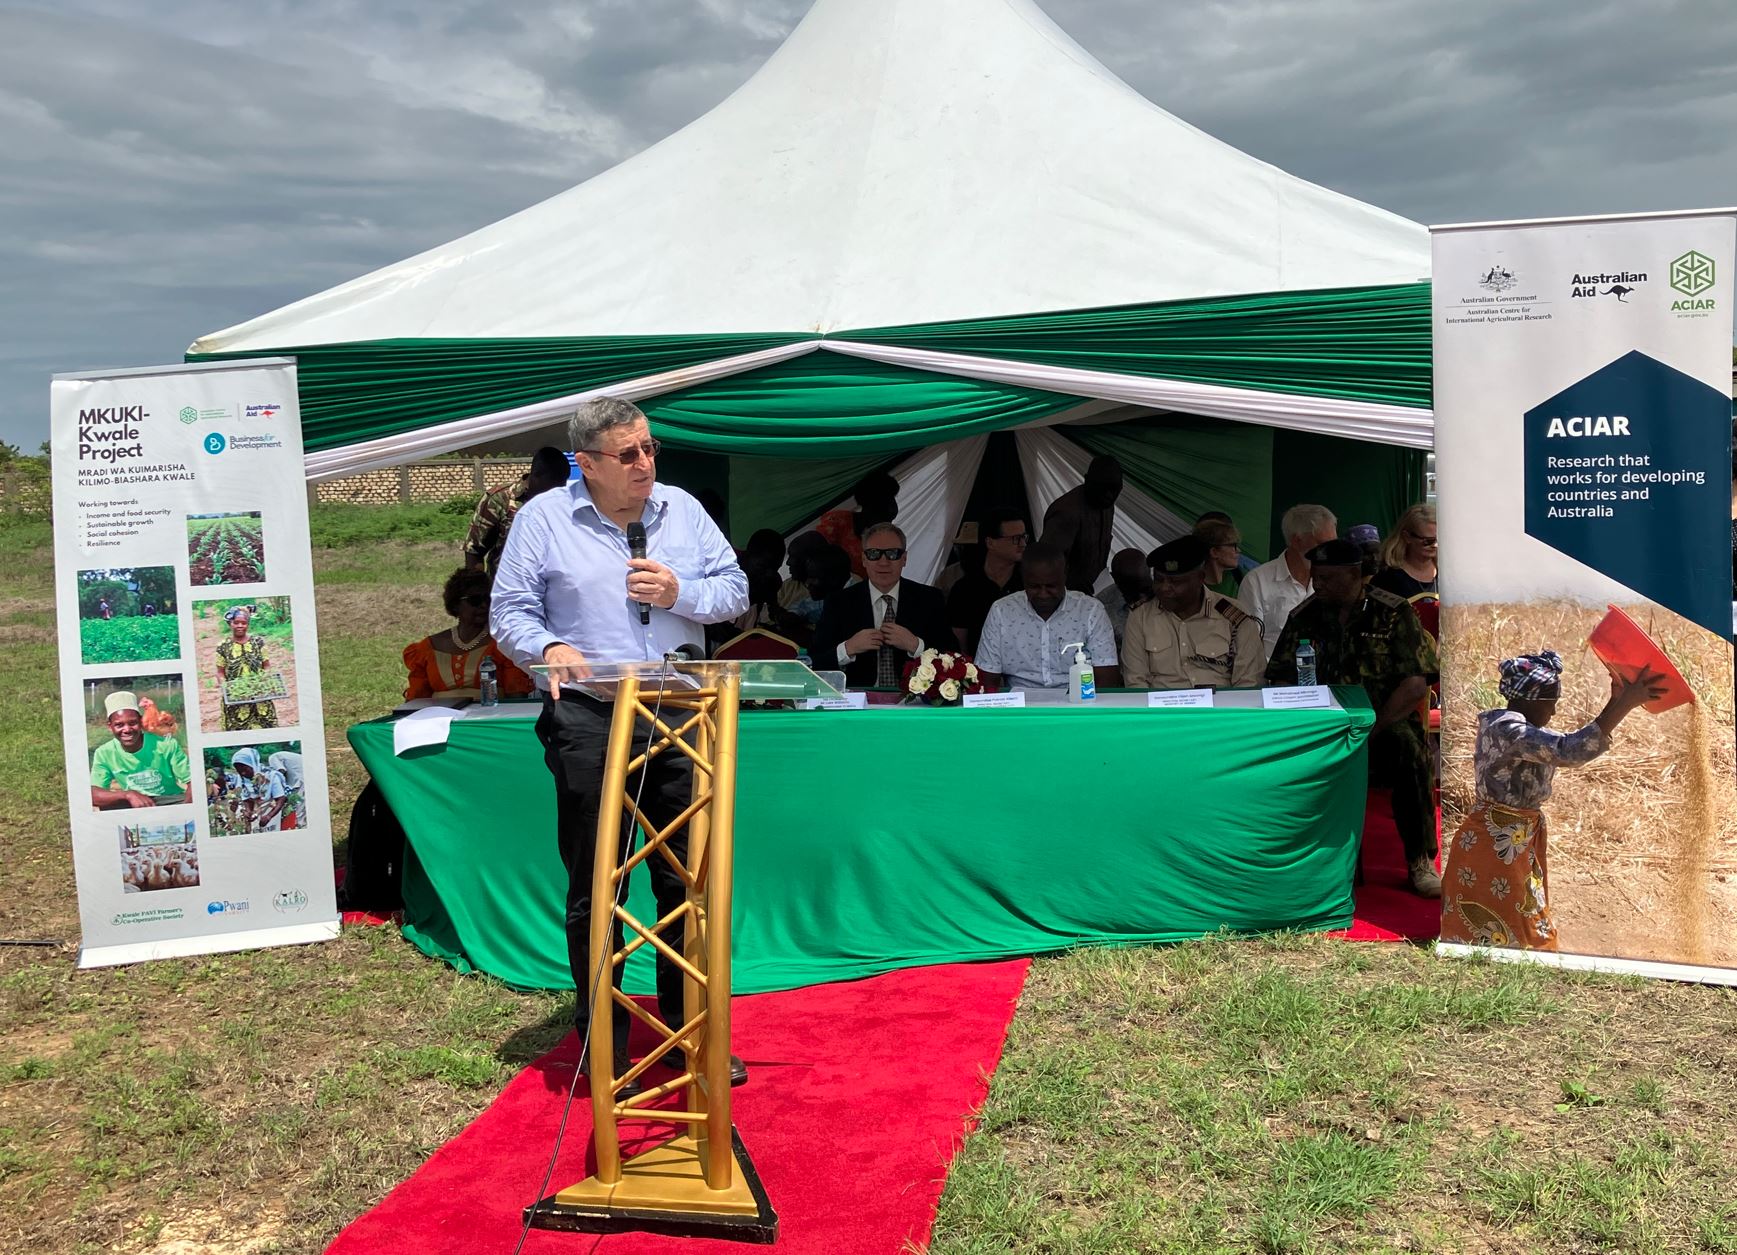 ACIAR Special Advisor, Commercial Adoption and Engagement, Mr Howard Hall, speaking at the launch of the project in Kwale, Kenya. 